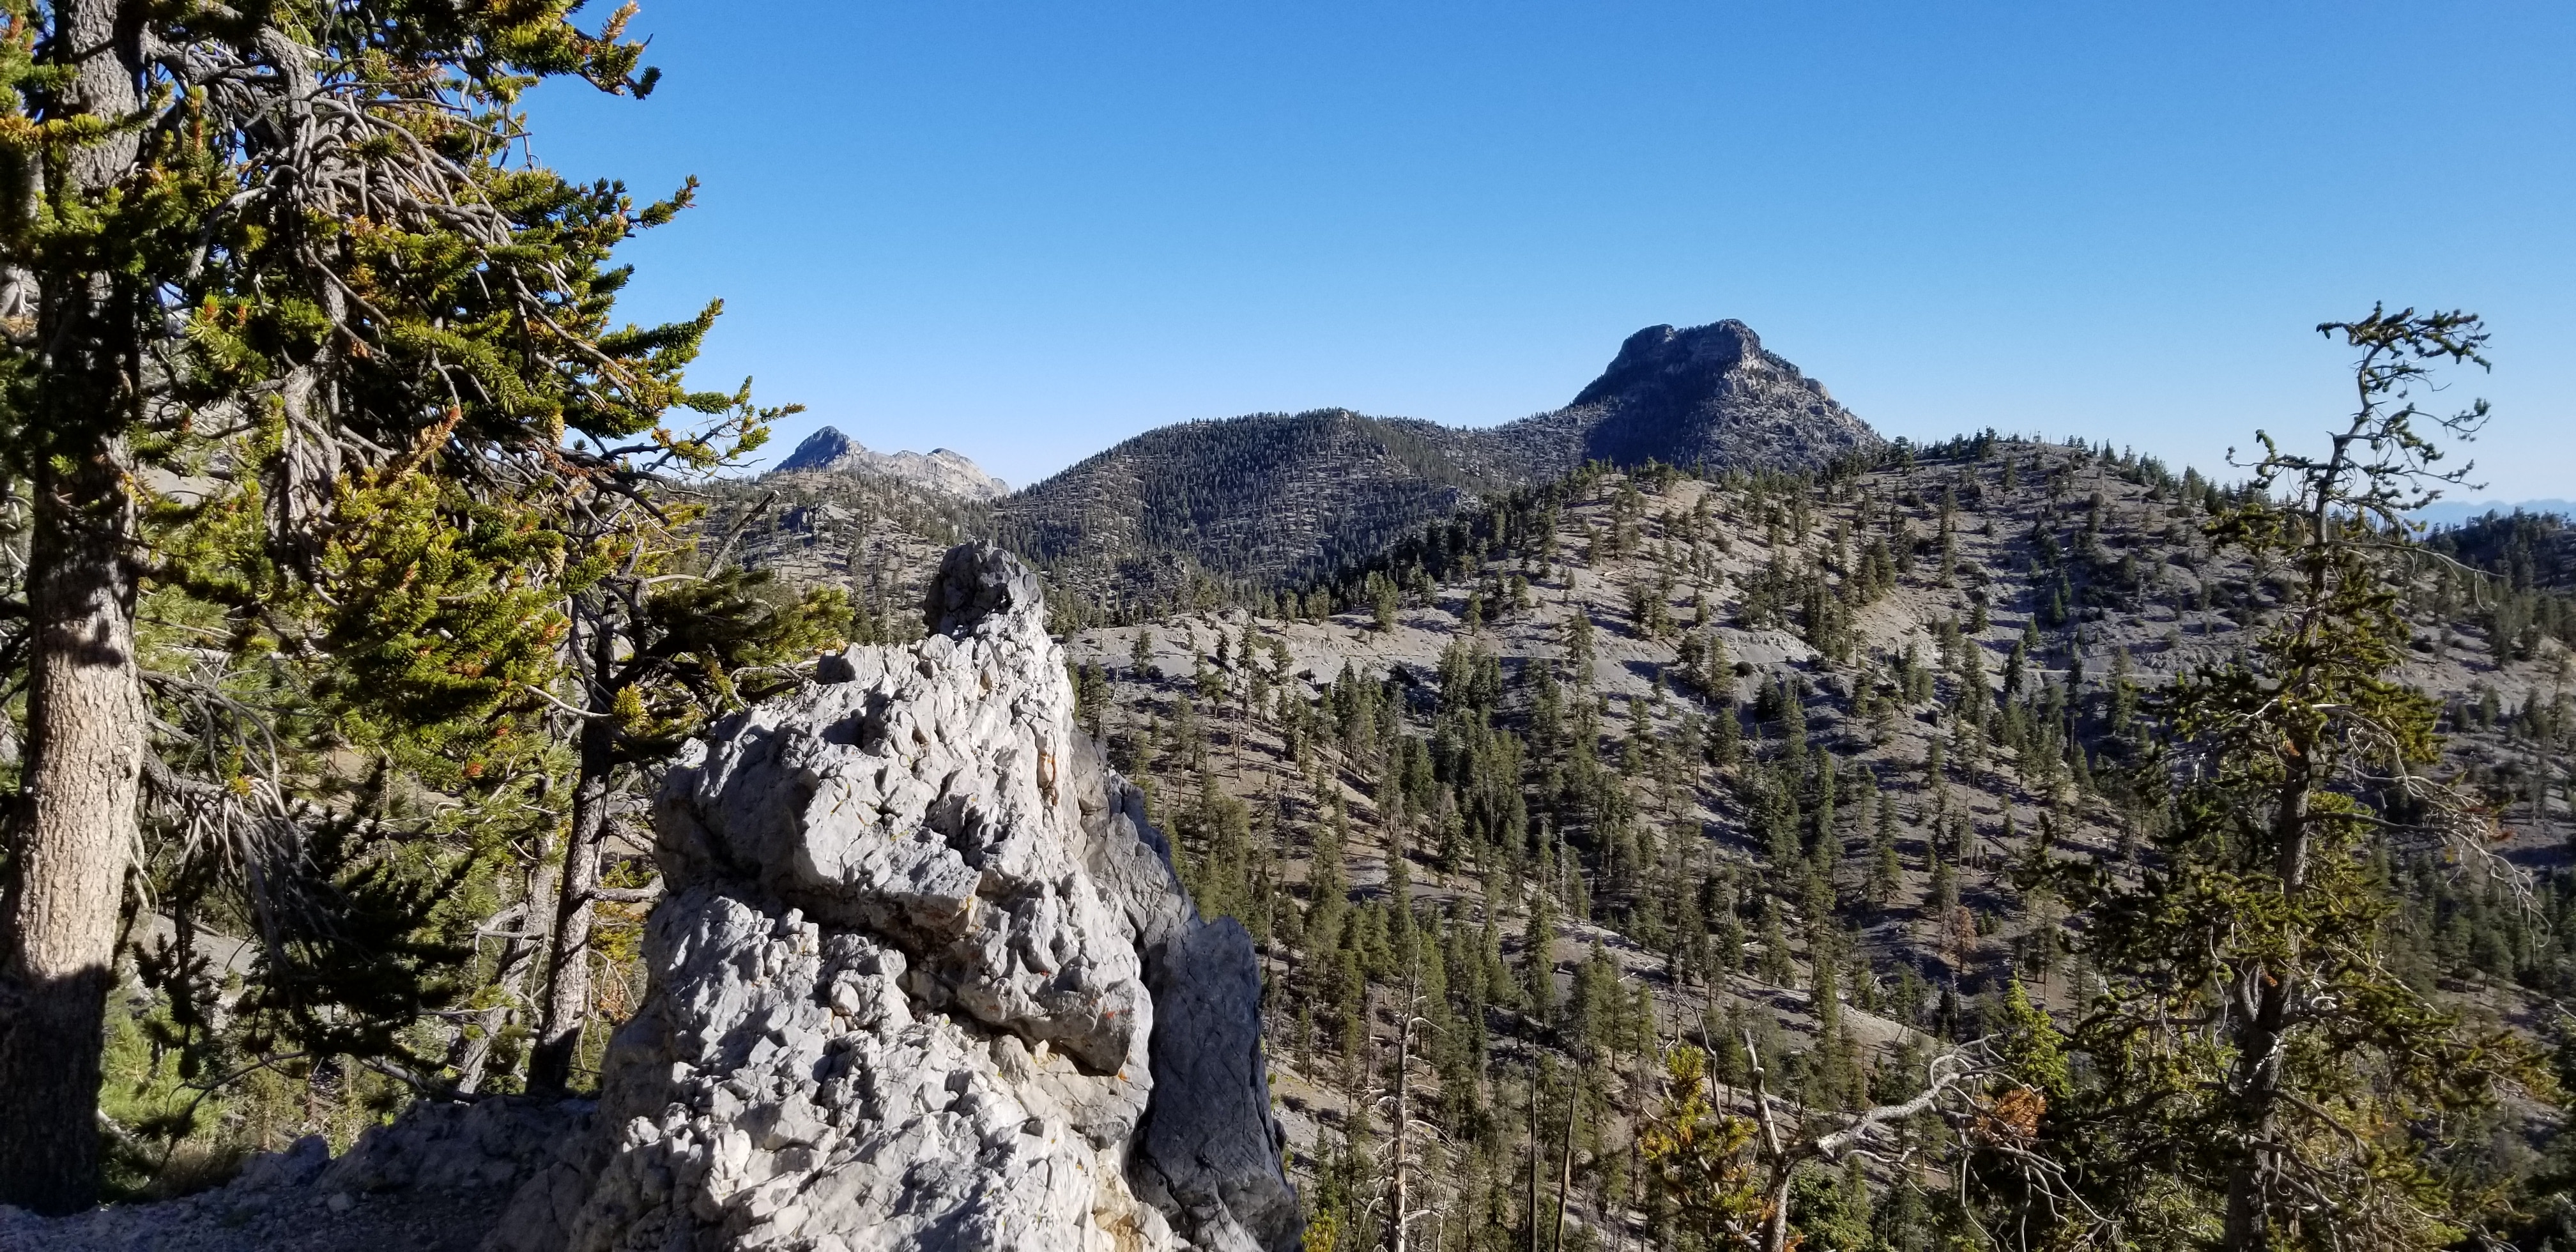 A 9453ft Rocky Peak Viewed from the Bristlecone Pine Trail in Mt. Charleston Wilderness, Nevada